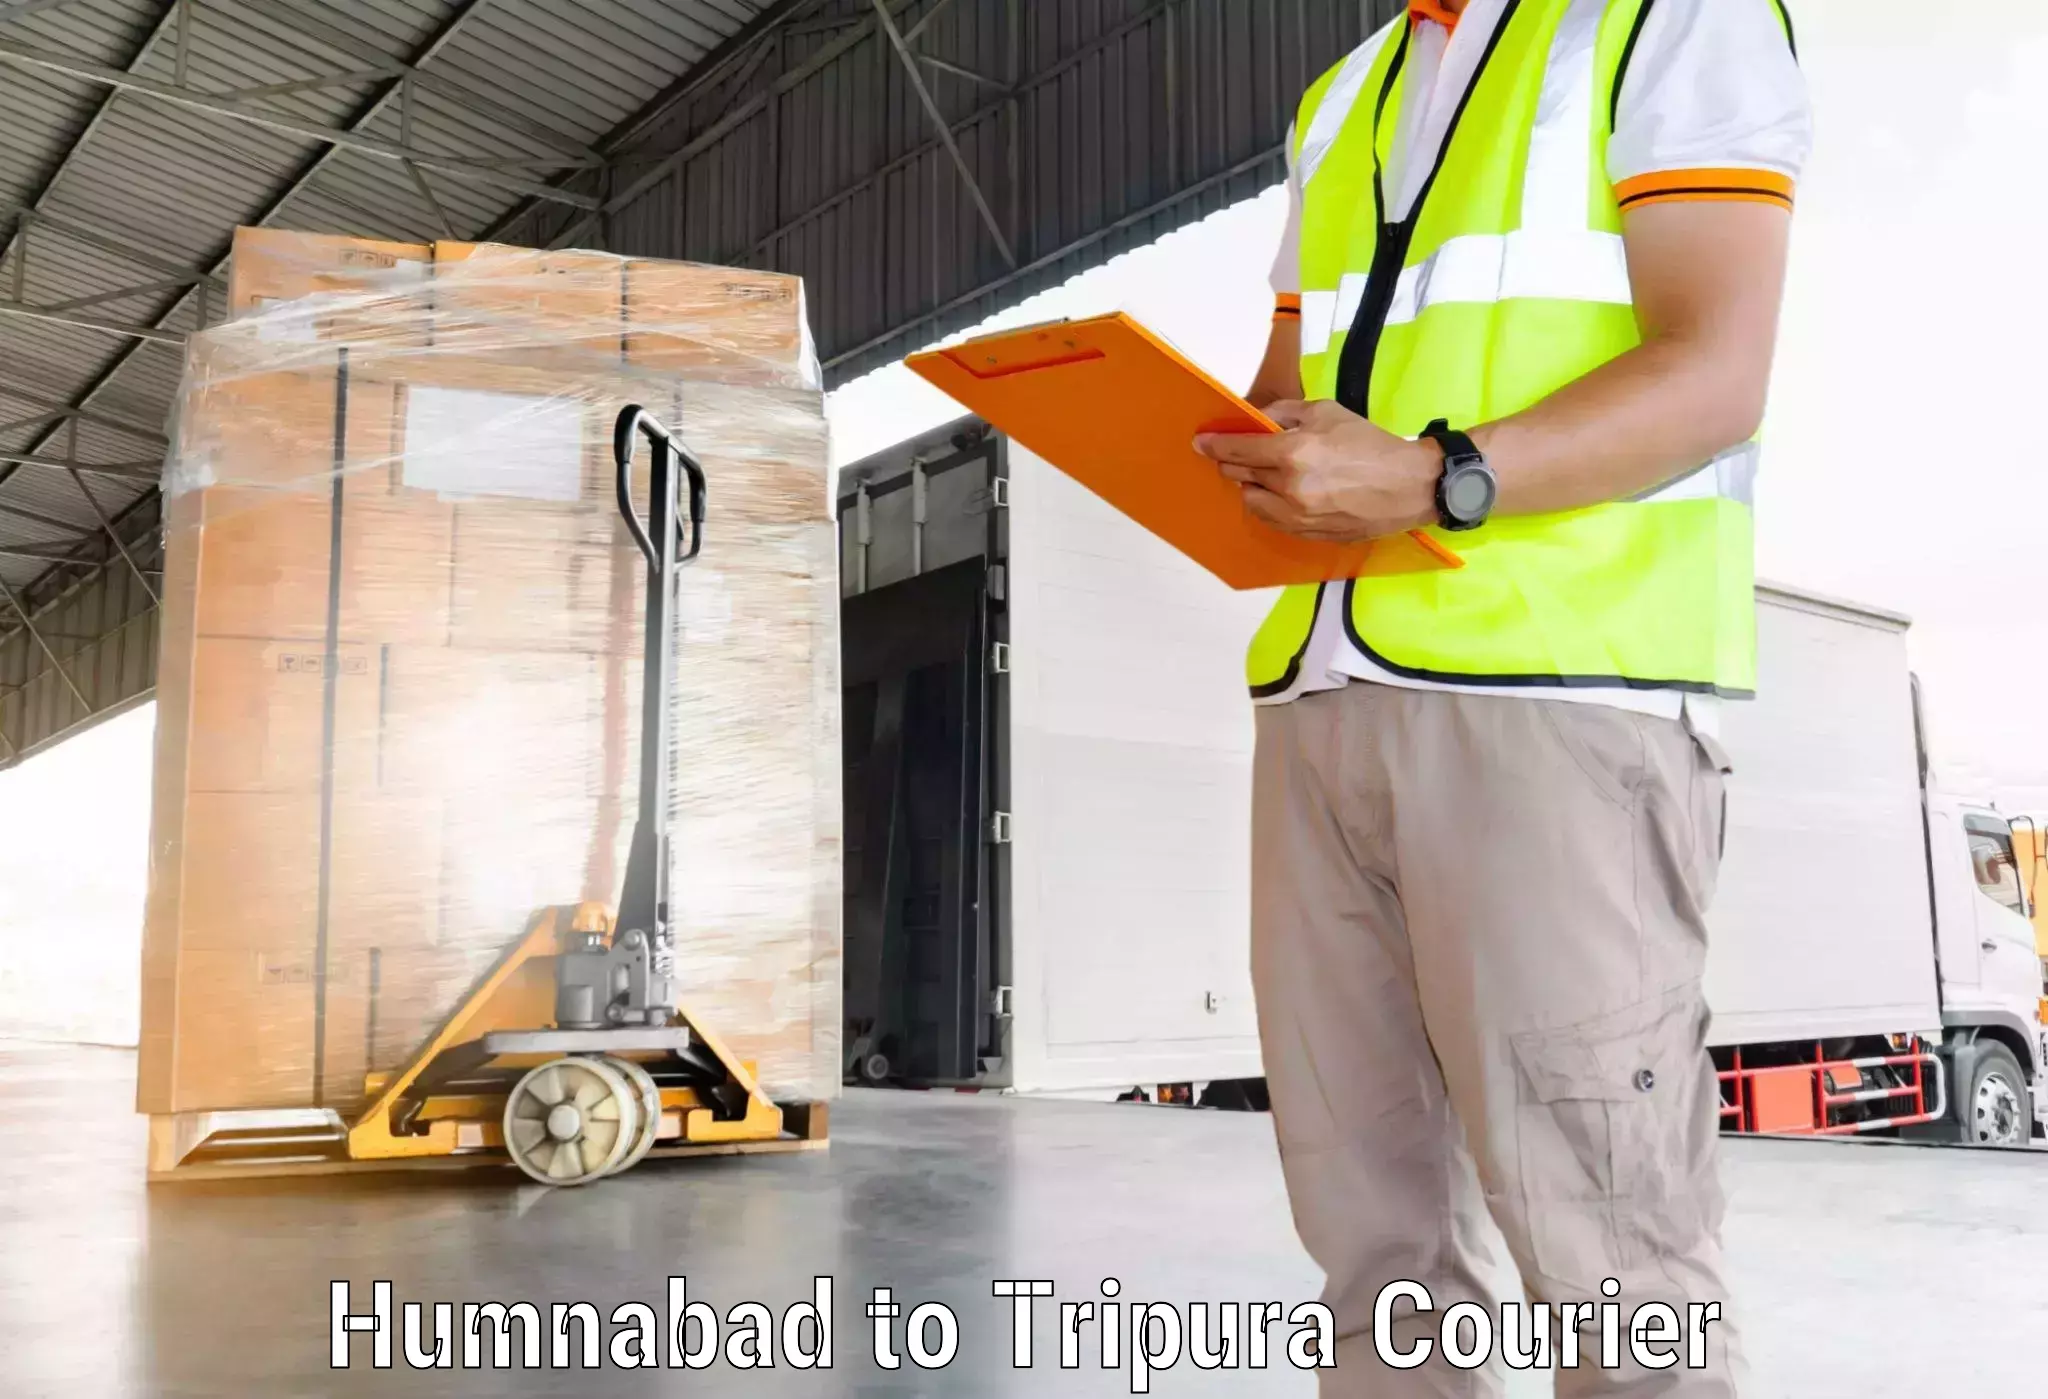 24-hour courier service Humnabad to Udaipur Tripura